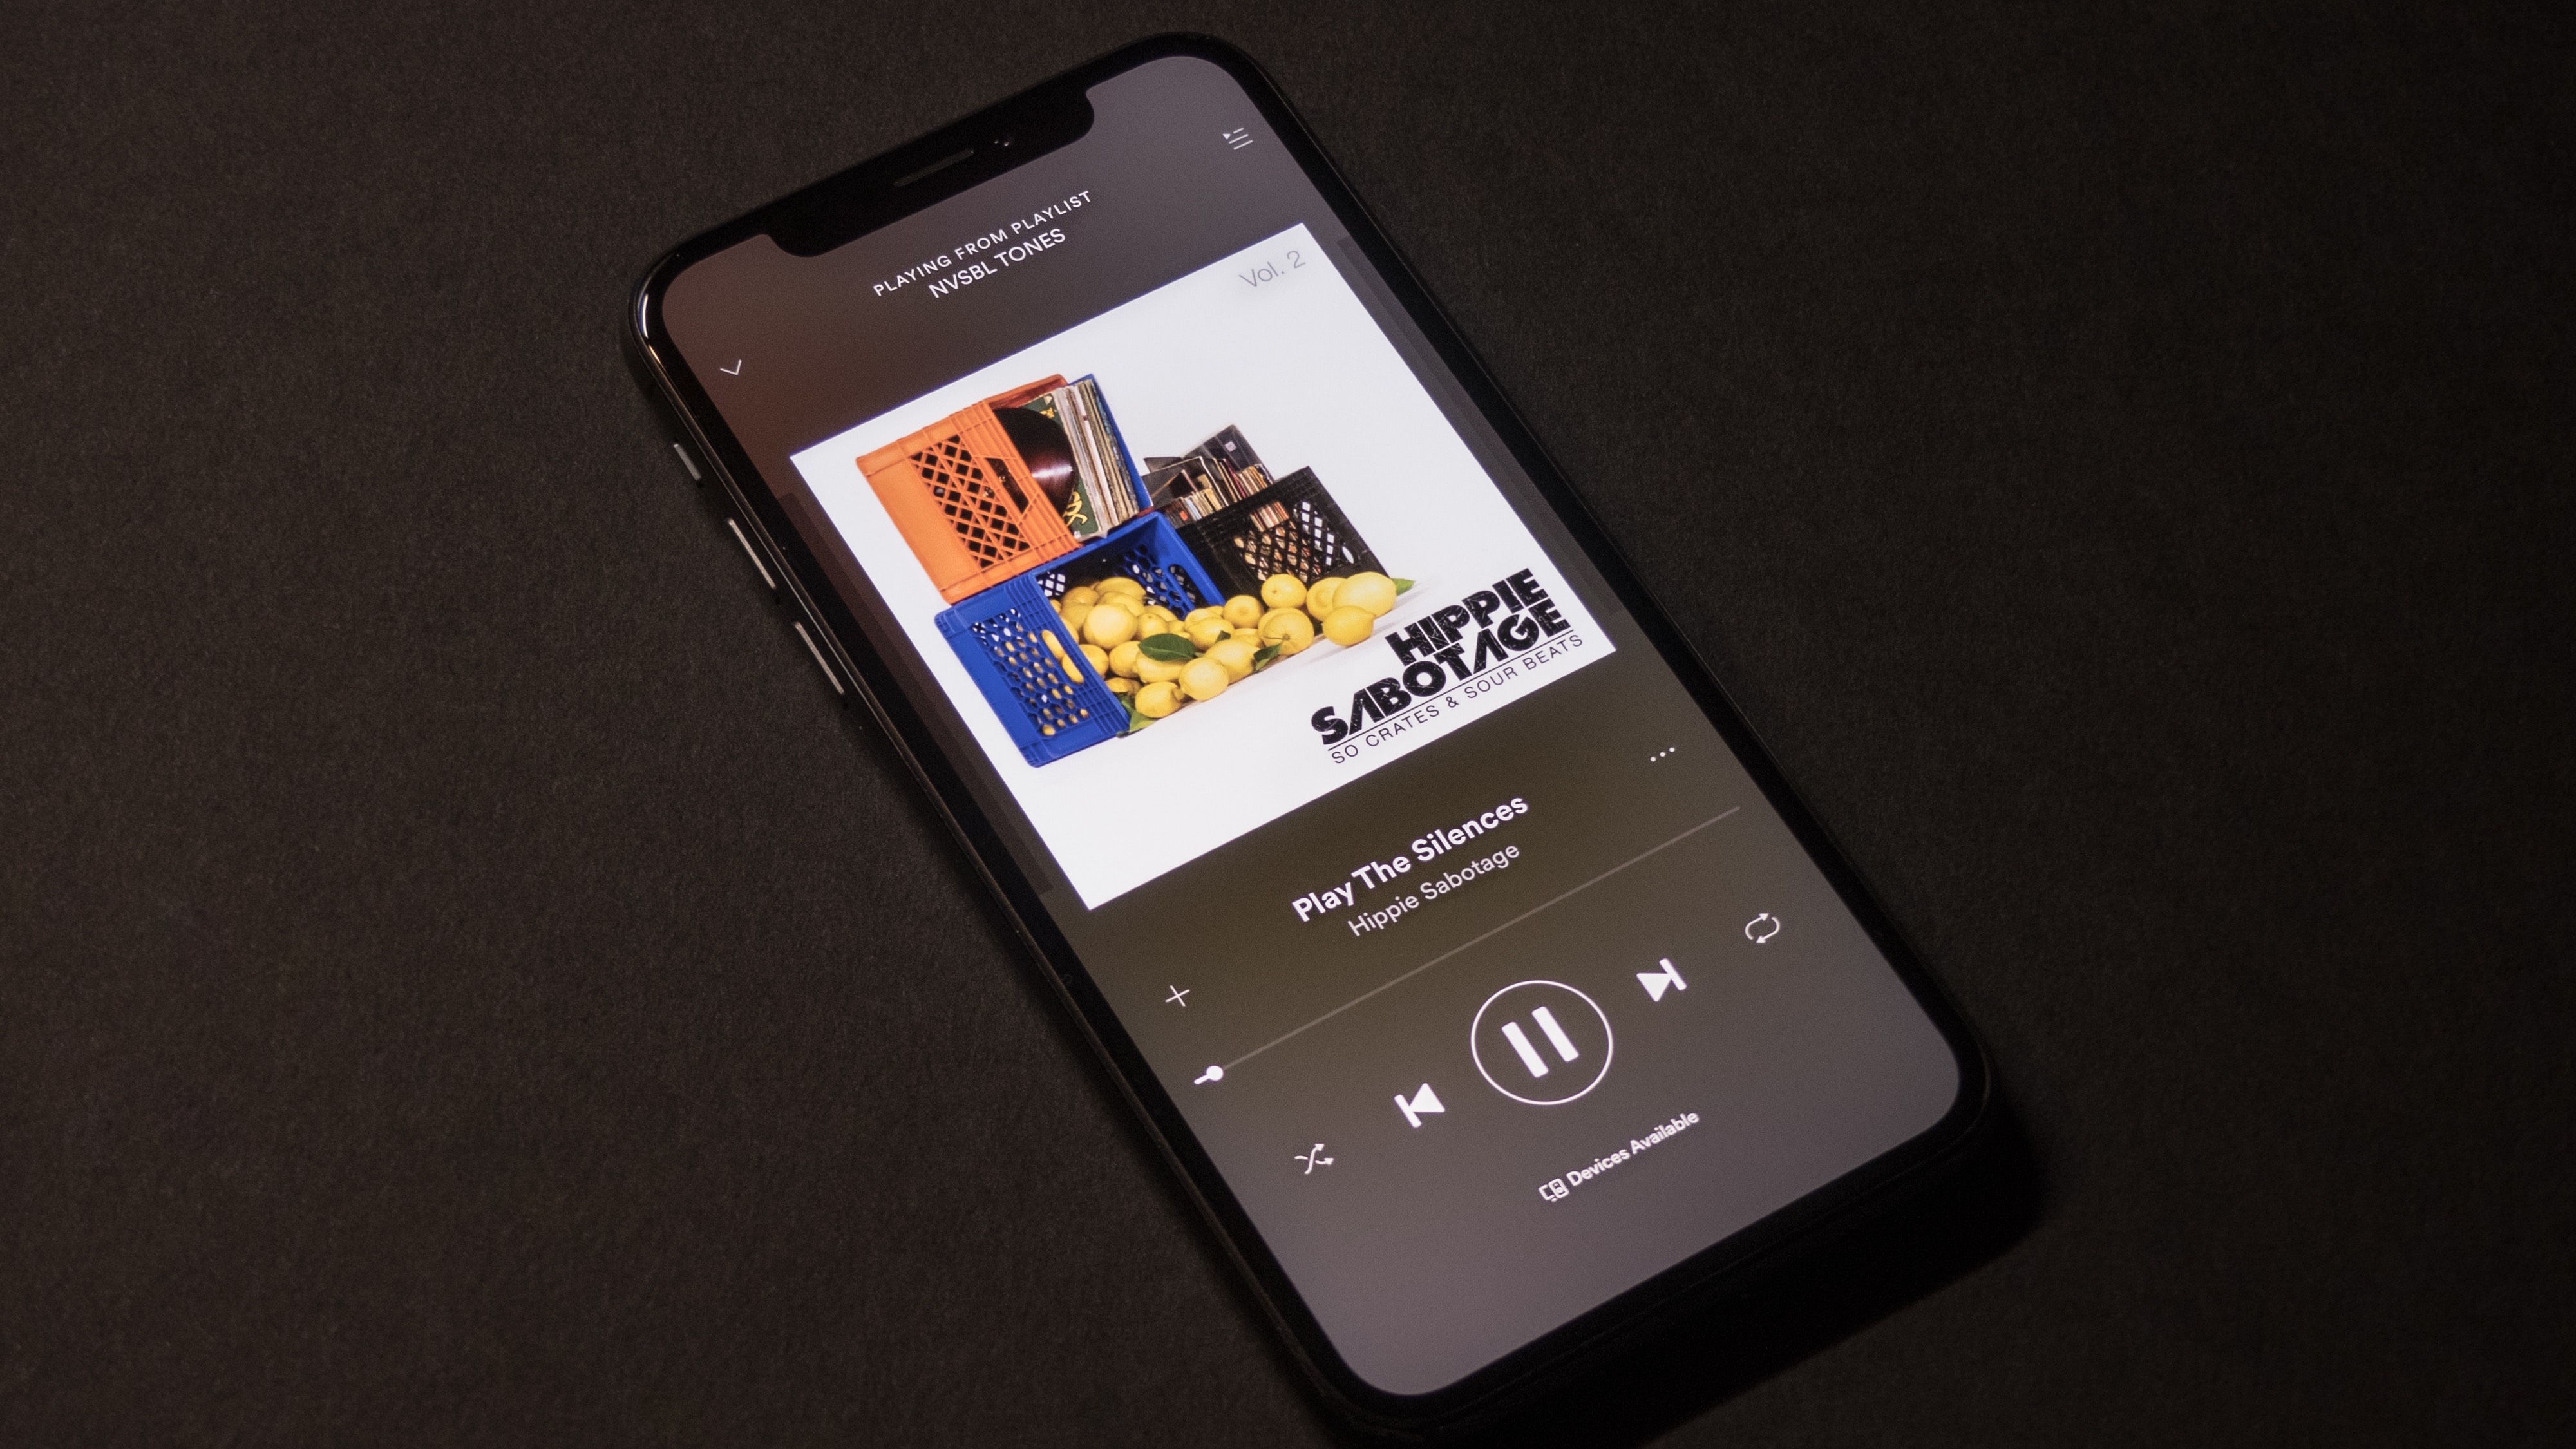 Spotify 1.2.13.661 instal the last version for android